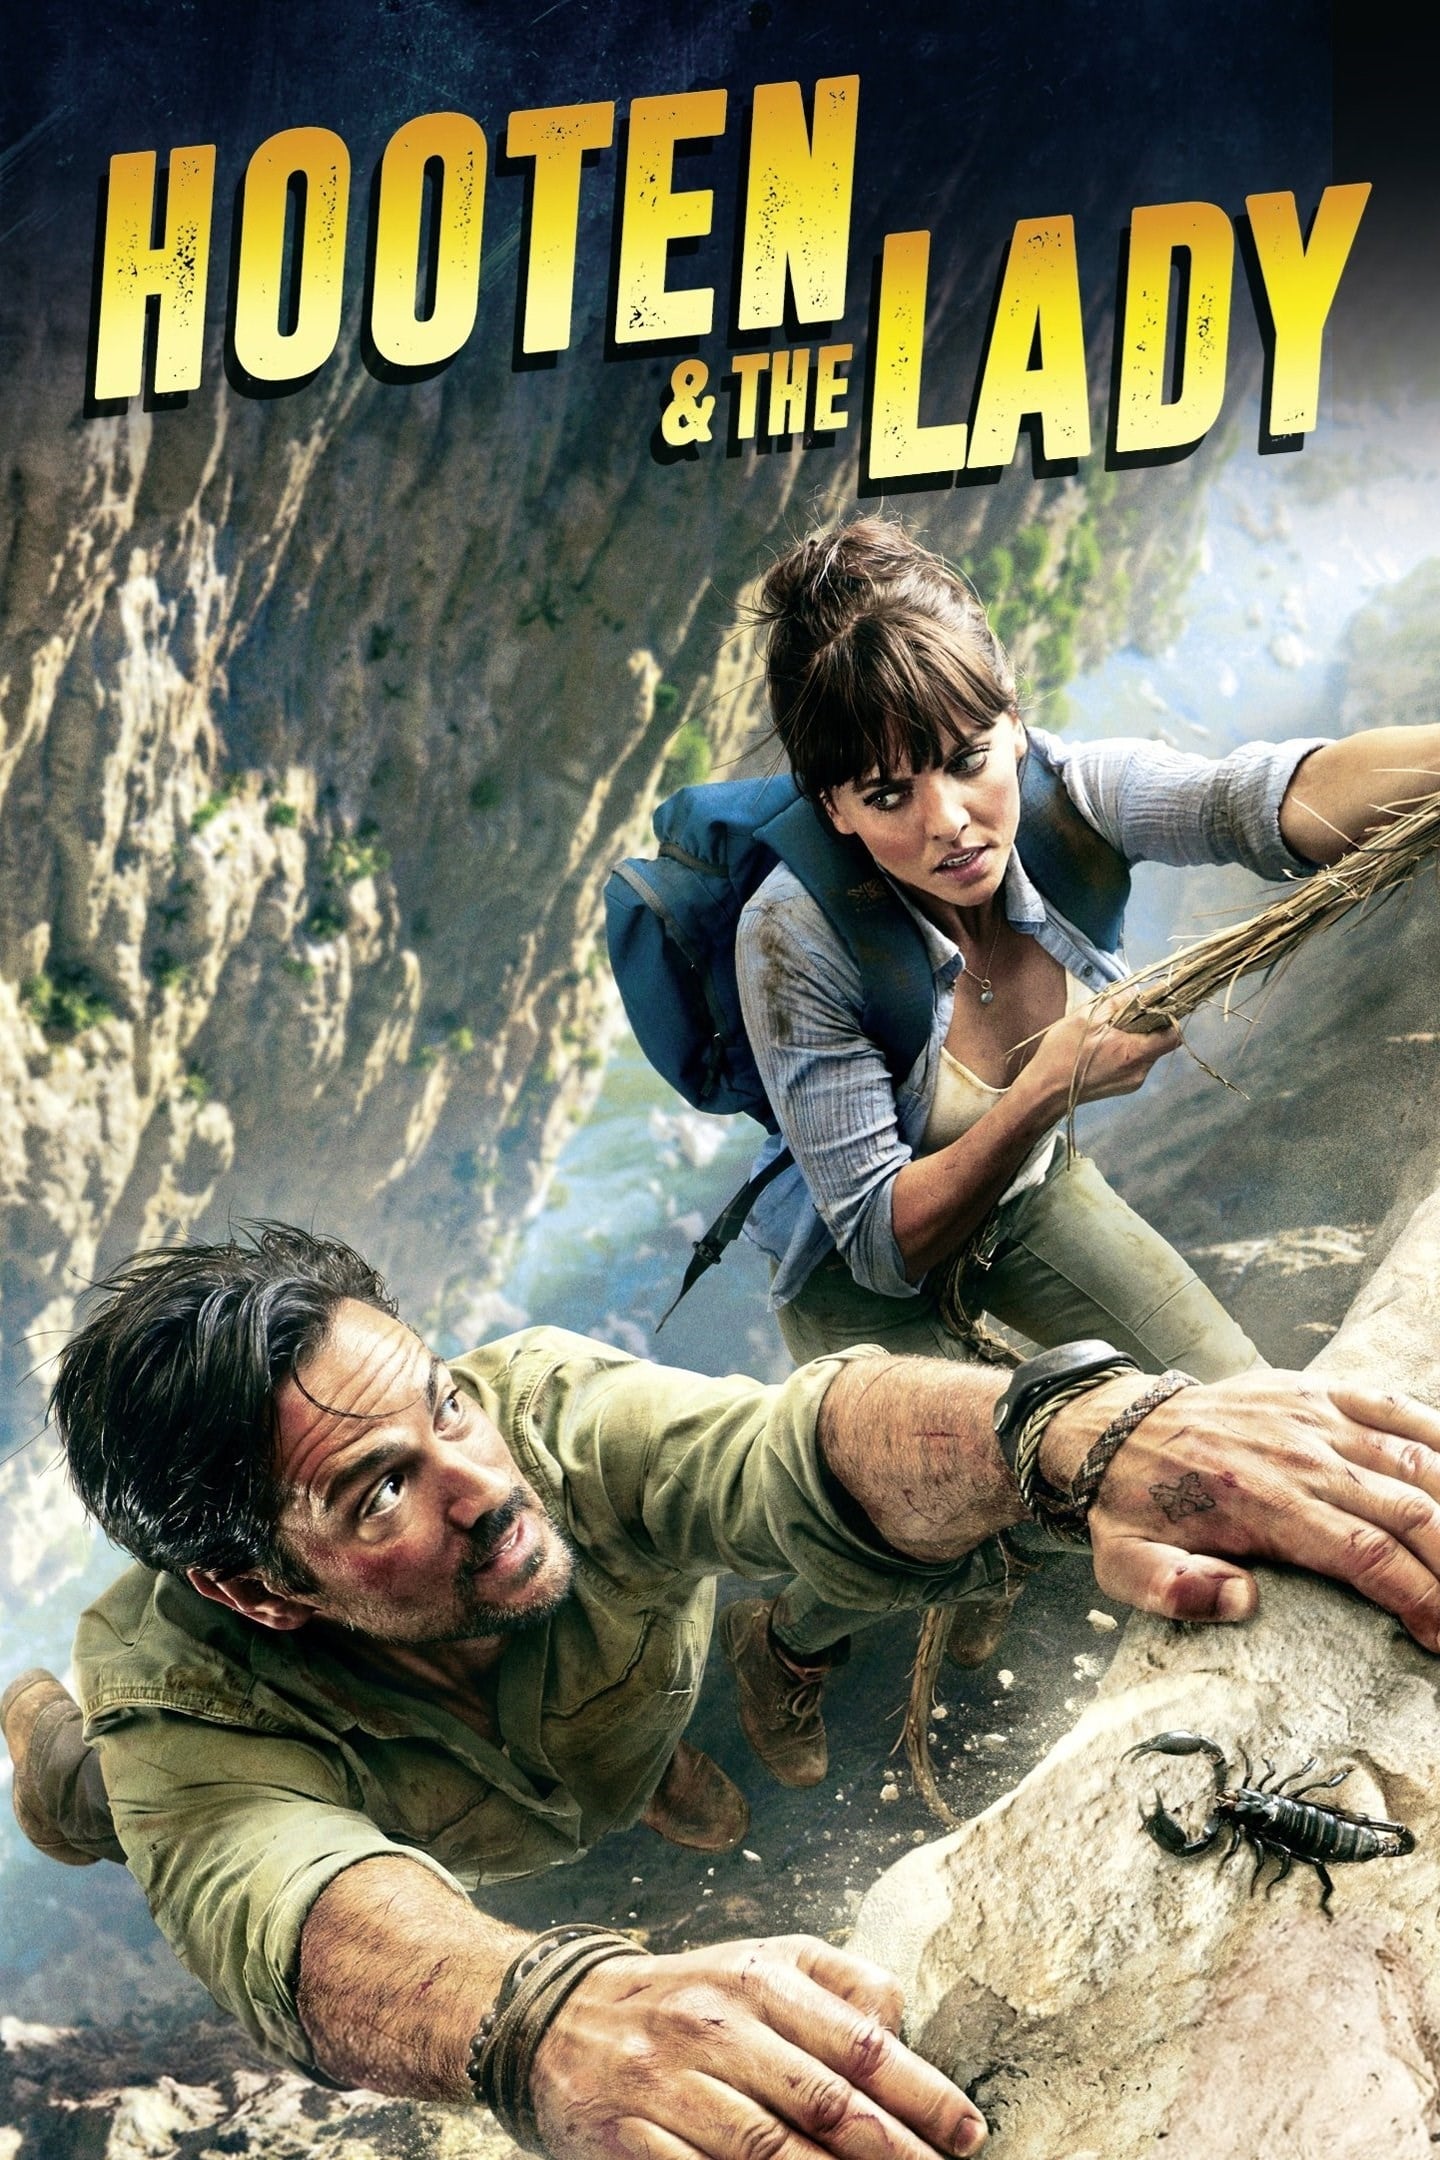 Hooten & The Lady TV Shows About Treasure